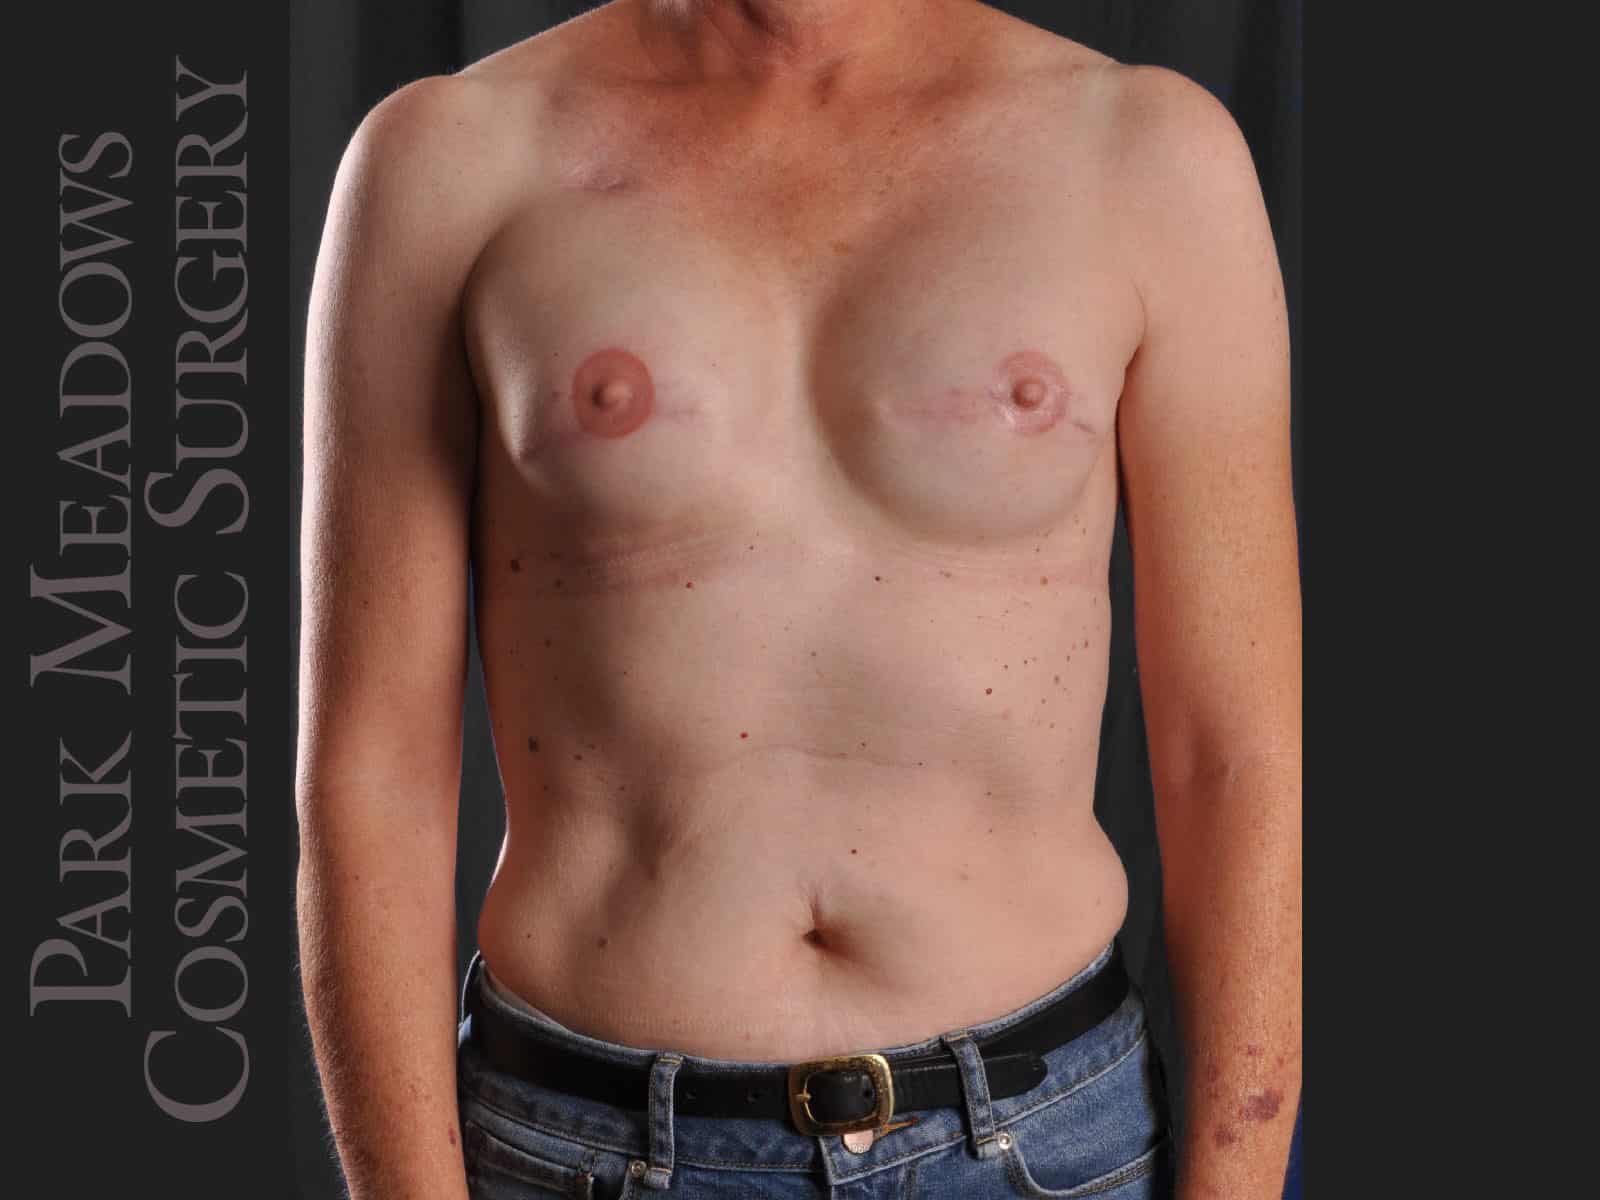 Bilateral mastectomy with tissue expanders; silicone implant exchange; two separate fat grafting sessions; nipple reconstruction and areola pigmentation